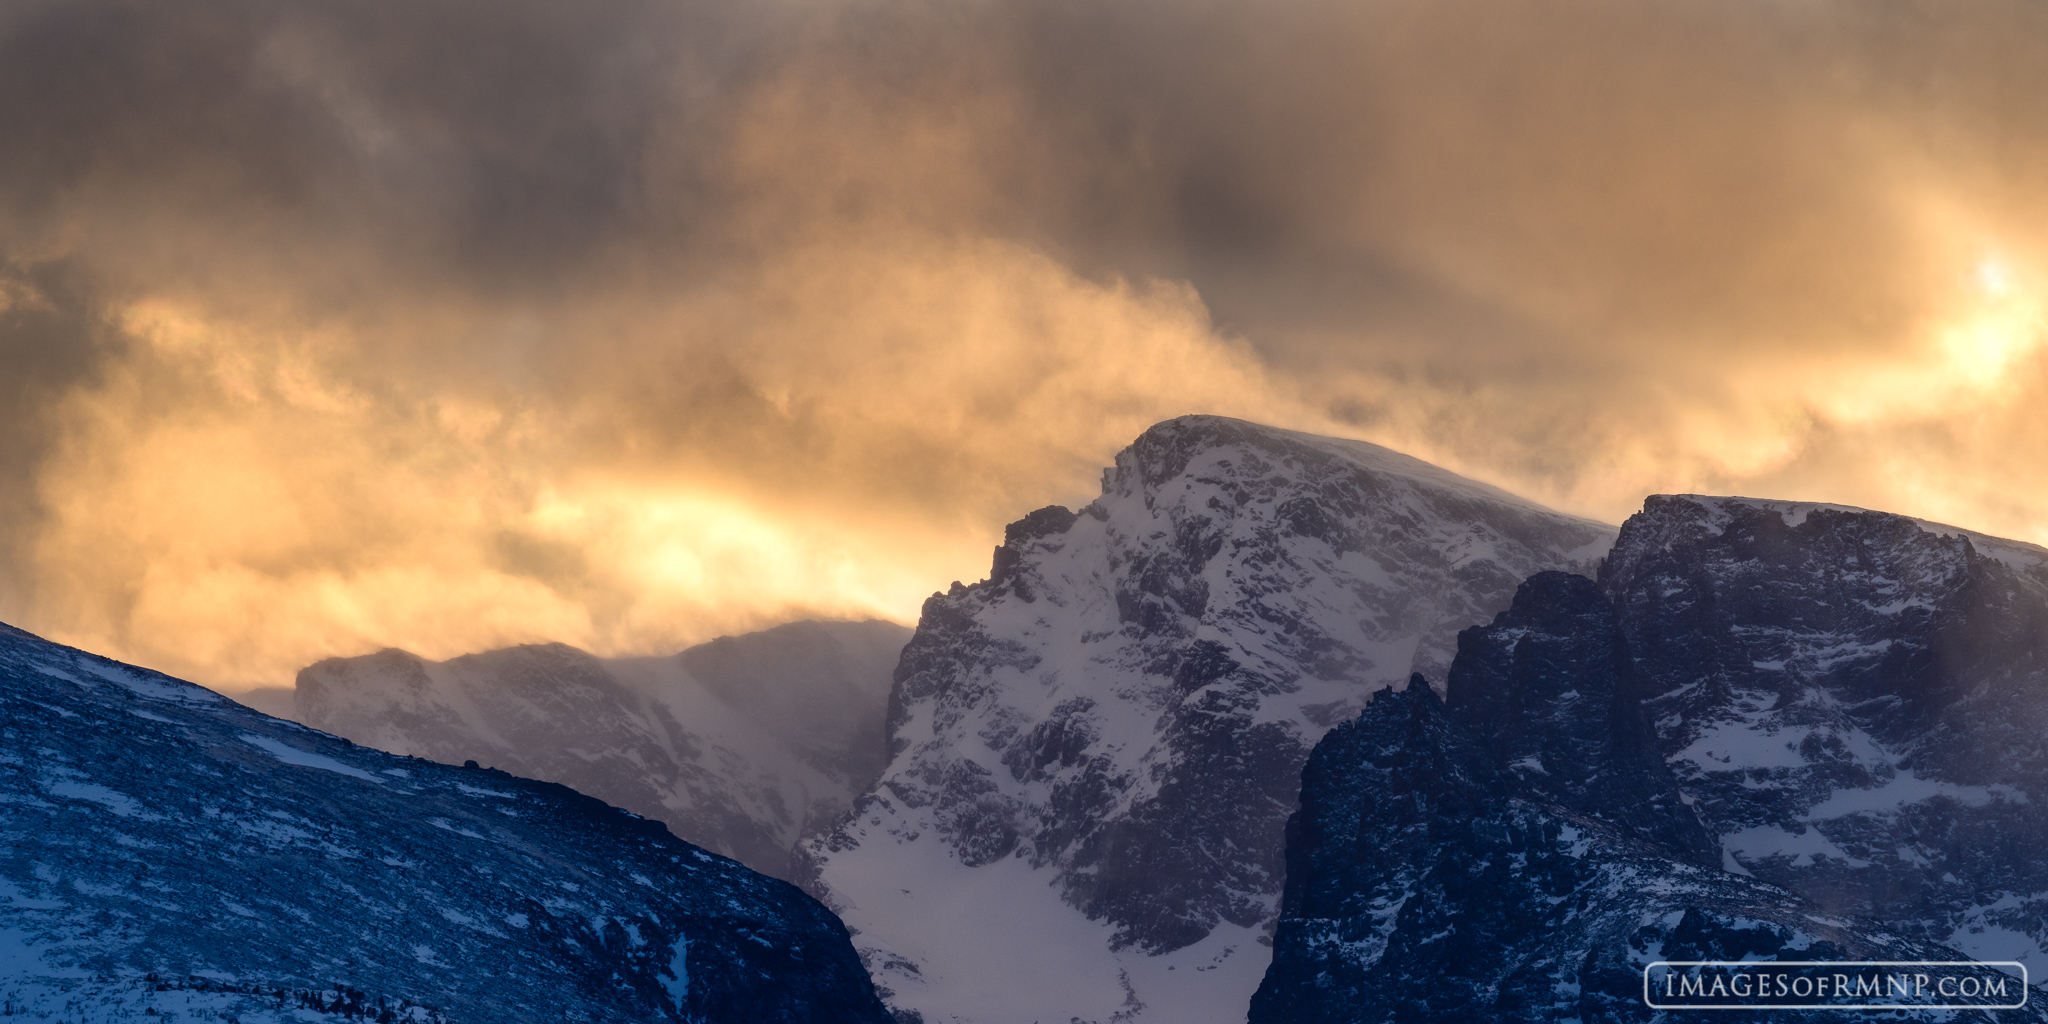 A winter storm blows over Taylor Peak as the sun sets behind it.